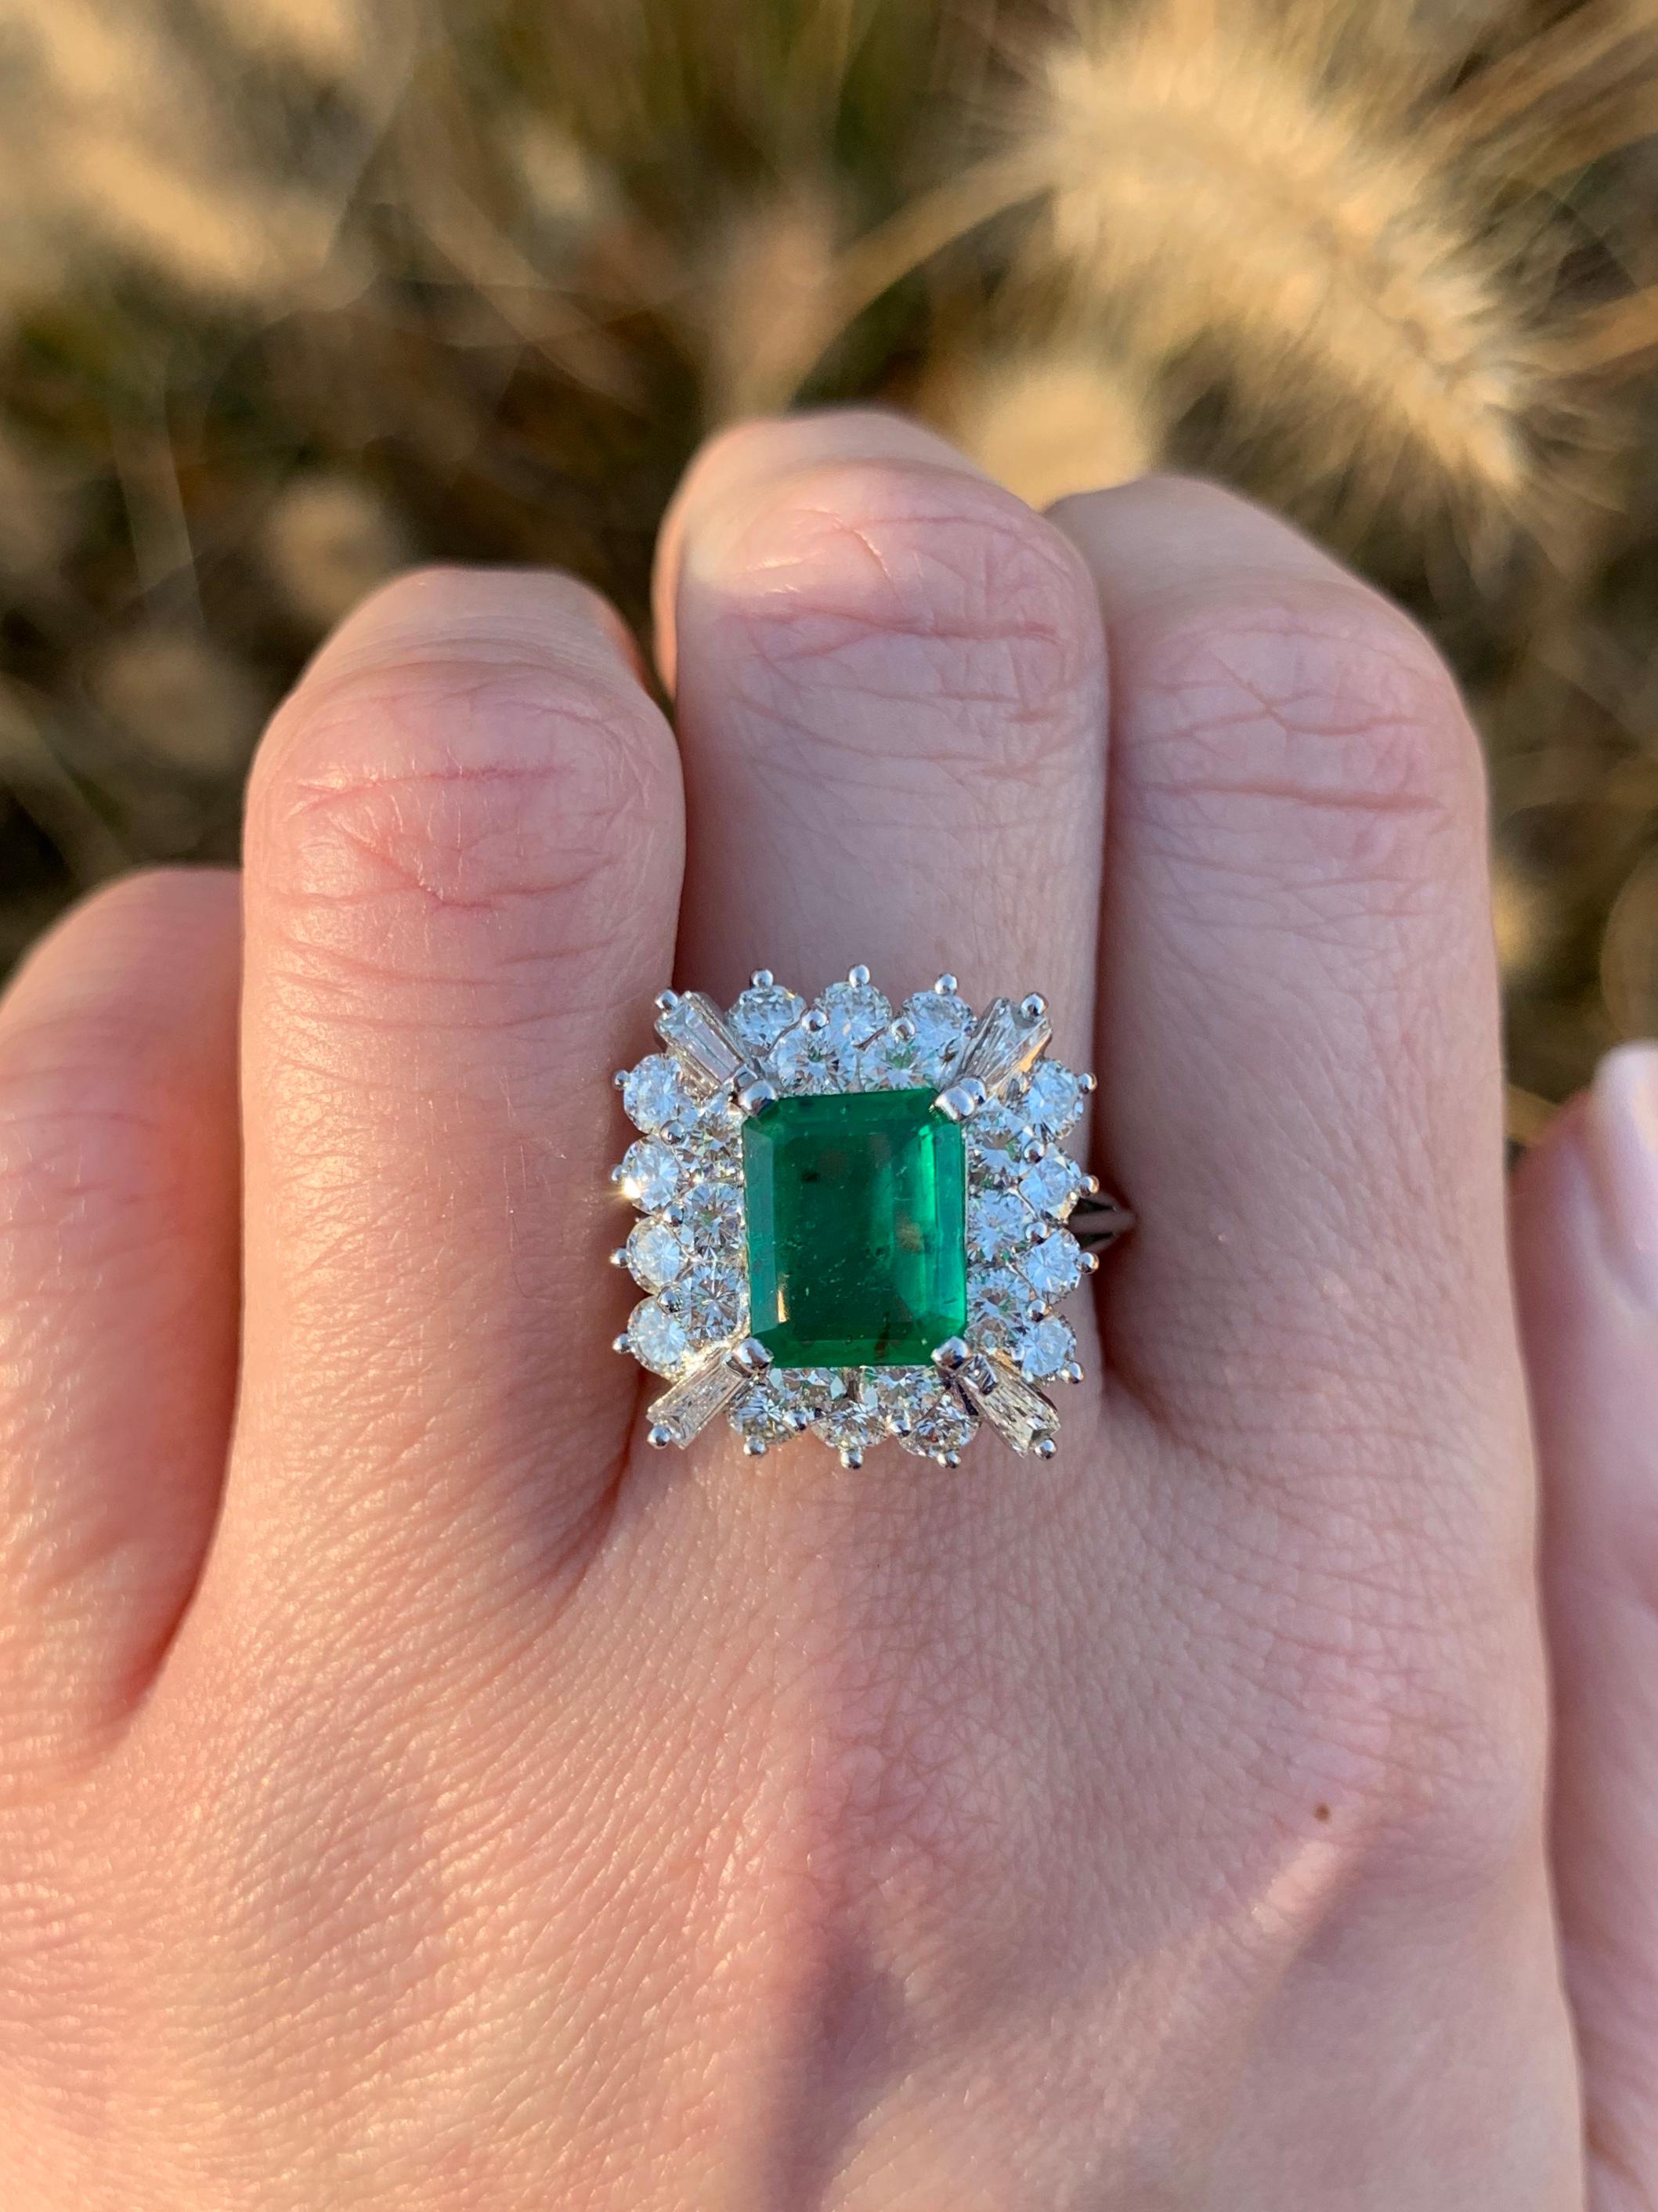 A gorgeous statement ring featuring a 1.90 carat emerald-cut emerald gemstone surrounded by two rows of high quality round brilliant diamonds, cornered with slender baguette diamonds. 24 Round brilliant diamonds have an approximate total weight of